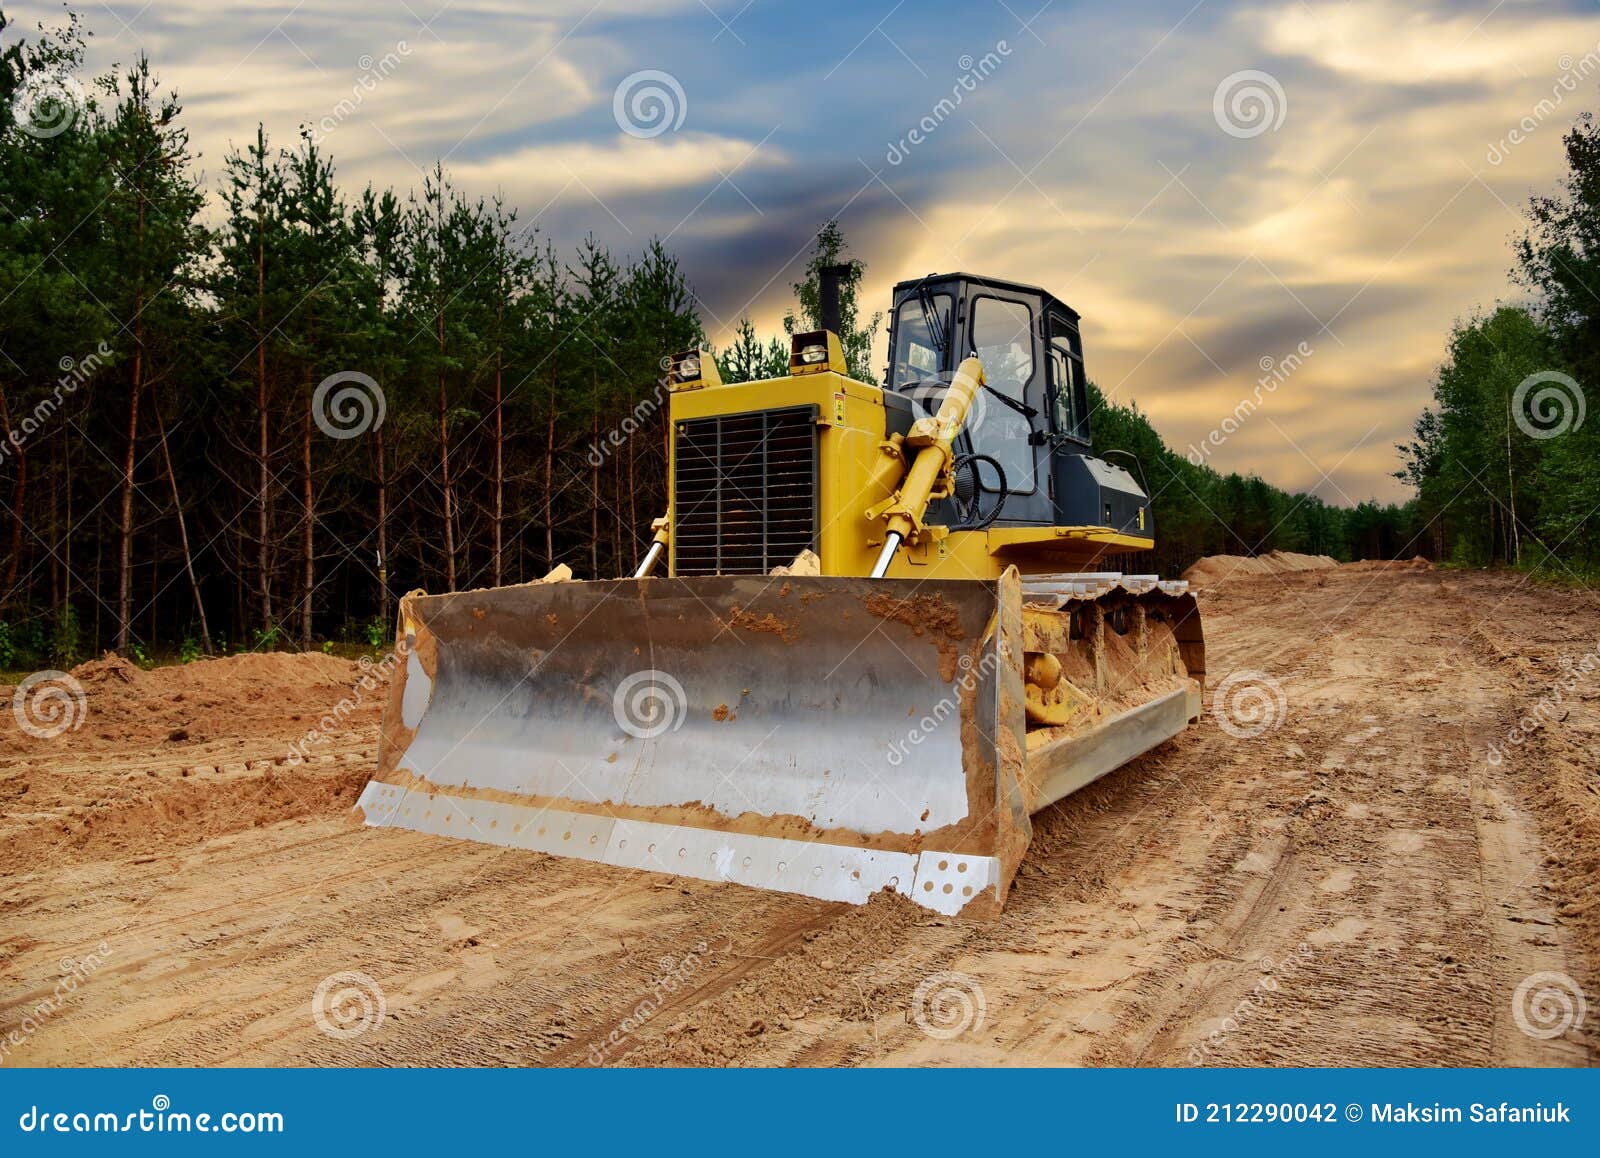 dozer during clearing forest for construction new road. bulldozer at forestry work on sunset background. earth-moving equipment at